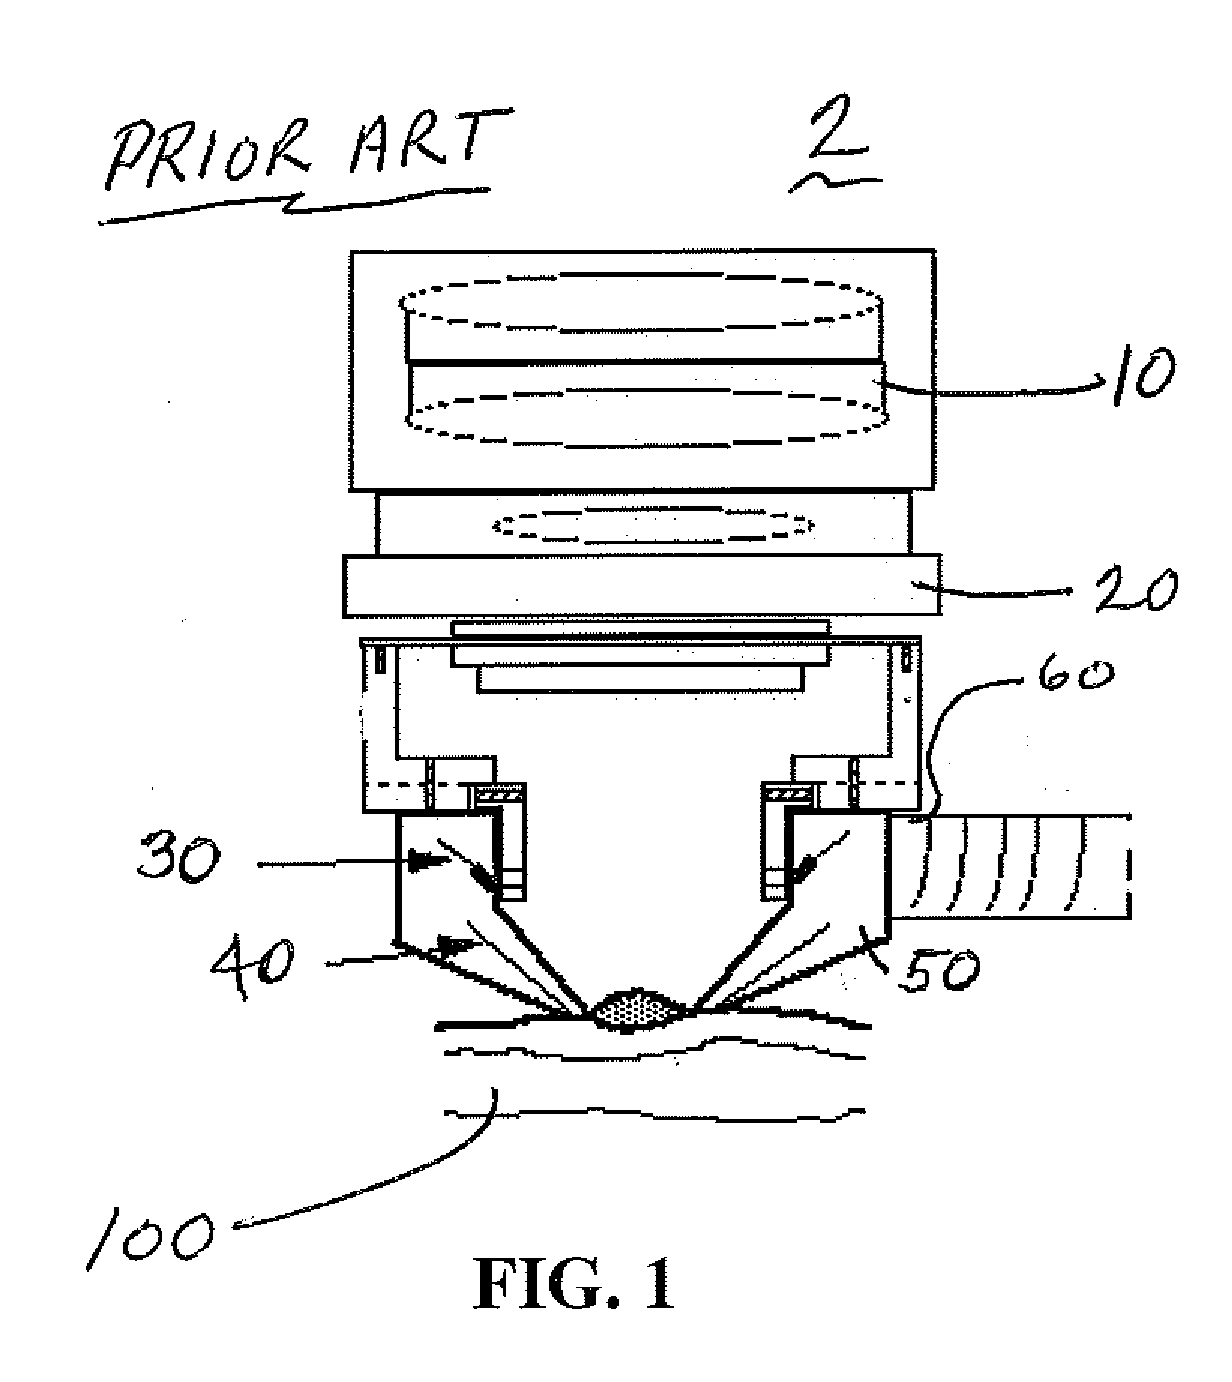 Method and Apparatus for Multi-spectral Imaging and Analysis of Skin Lesions and Biological Tissues